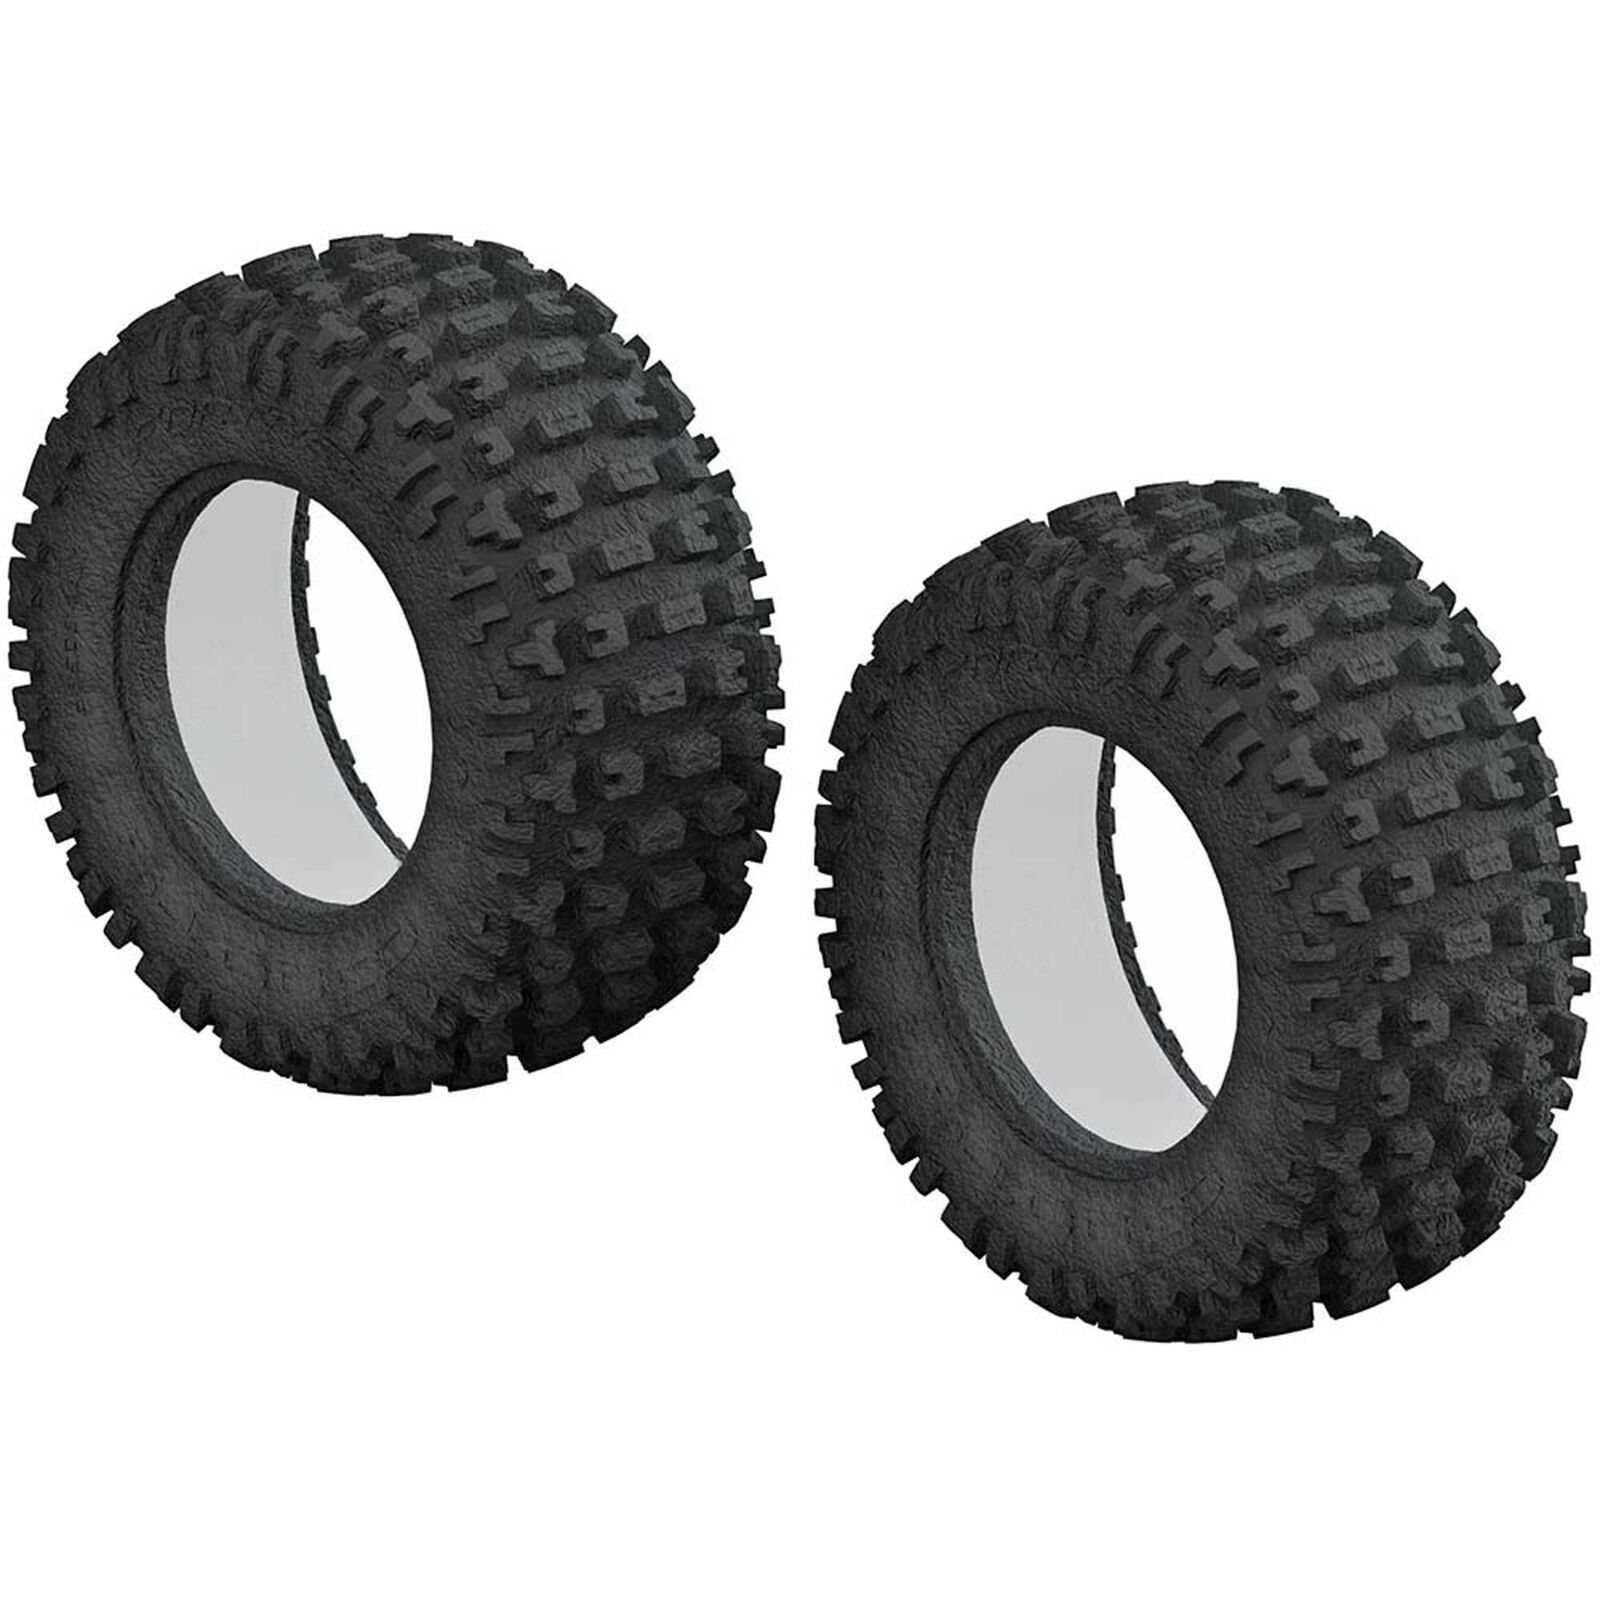 1/10 dBoots Fortress Short Course Front/Rear 3.0/2.2 Tire & Inserts (2)